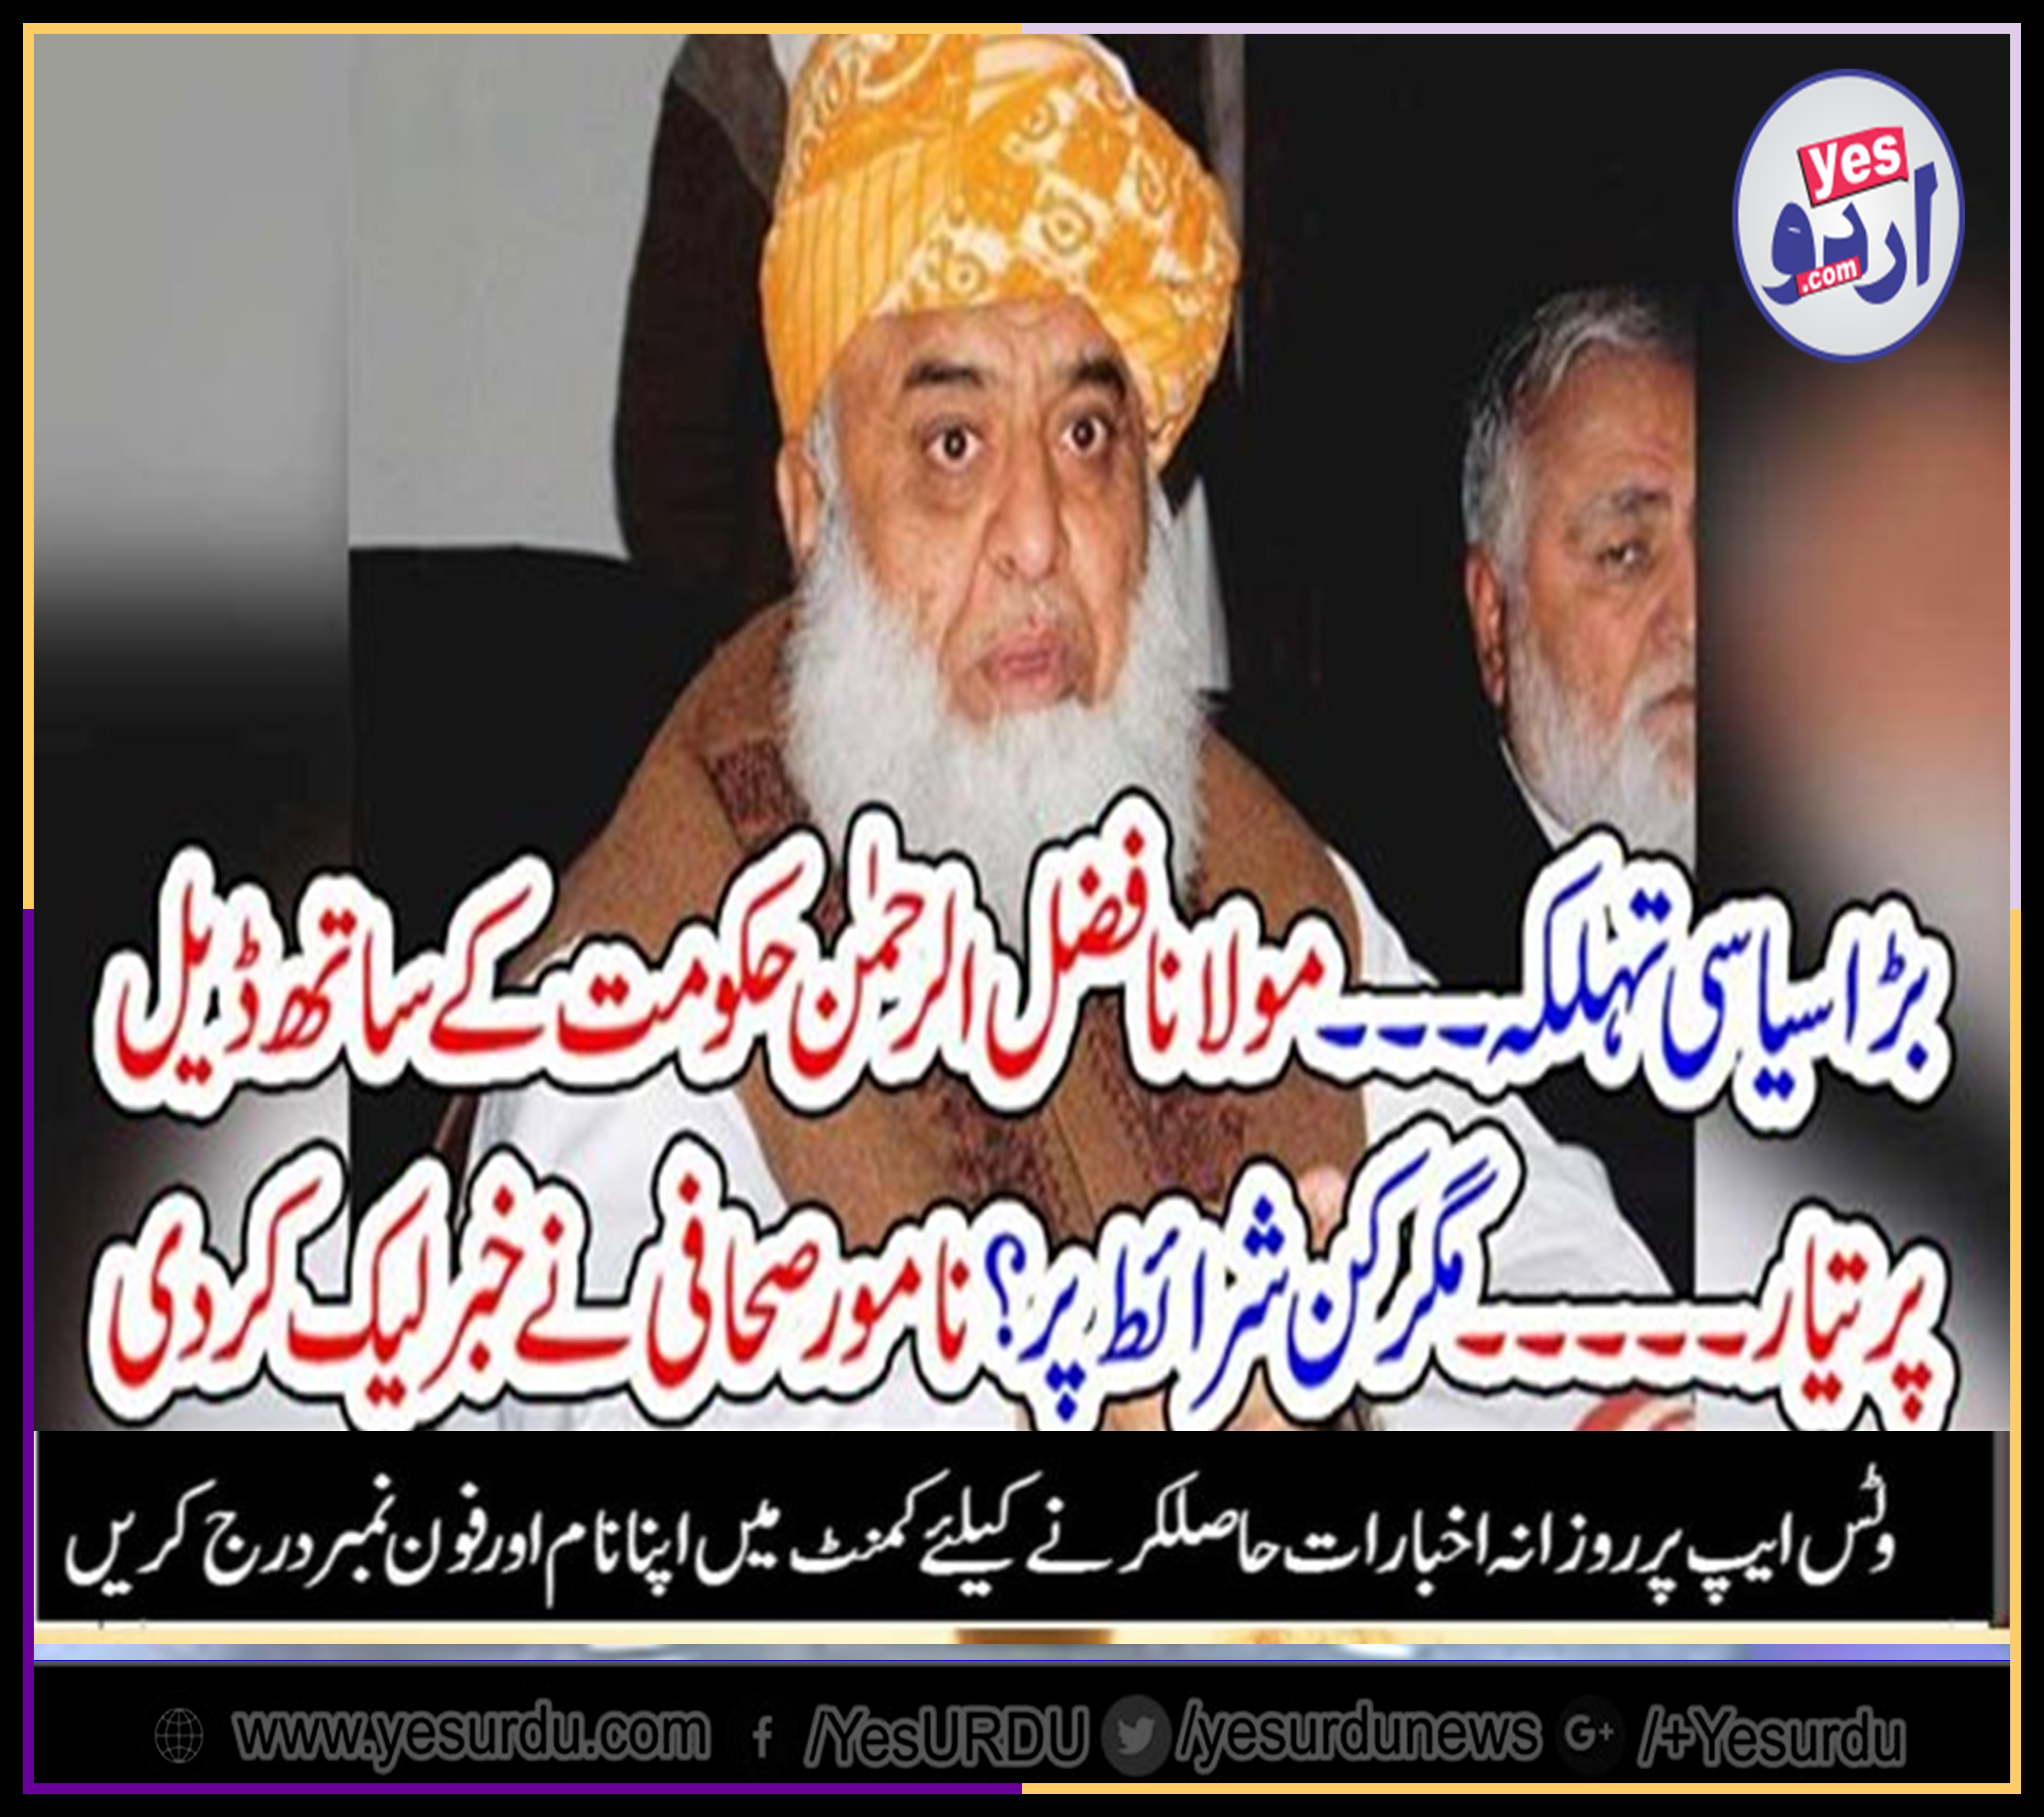 molana fazal ur rahman, ready, for, making, a, deal, with, Government, but, the, conditions, set, by, him, are, the, new